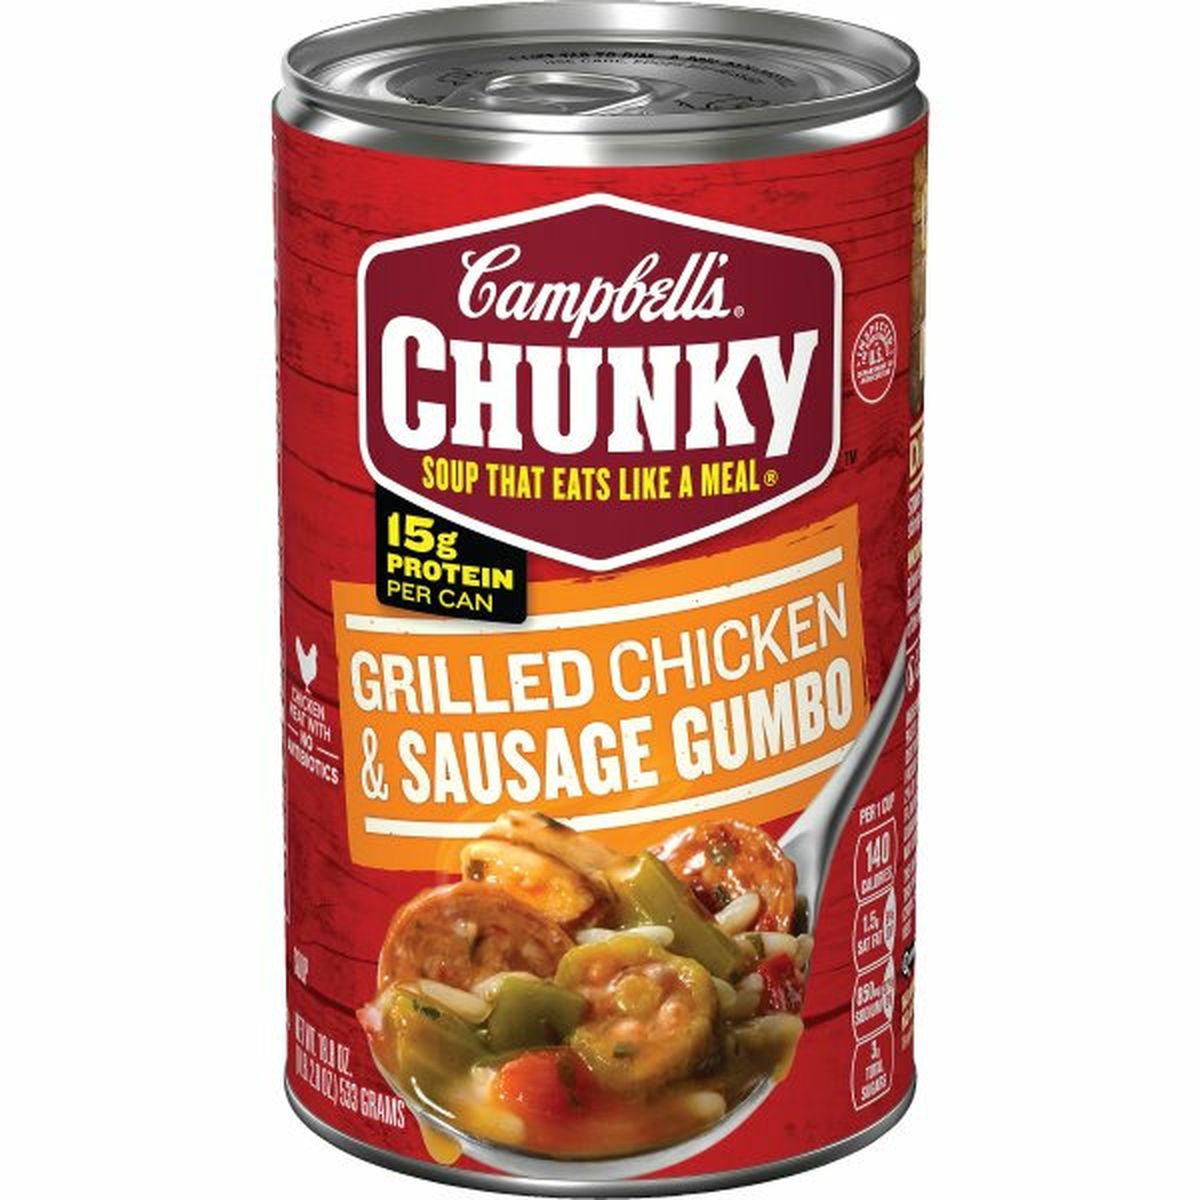 Calories in Campbell'ss Chunkys Chunky Grilled Chicken & Sausage Gumbo